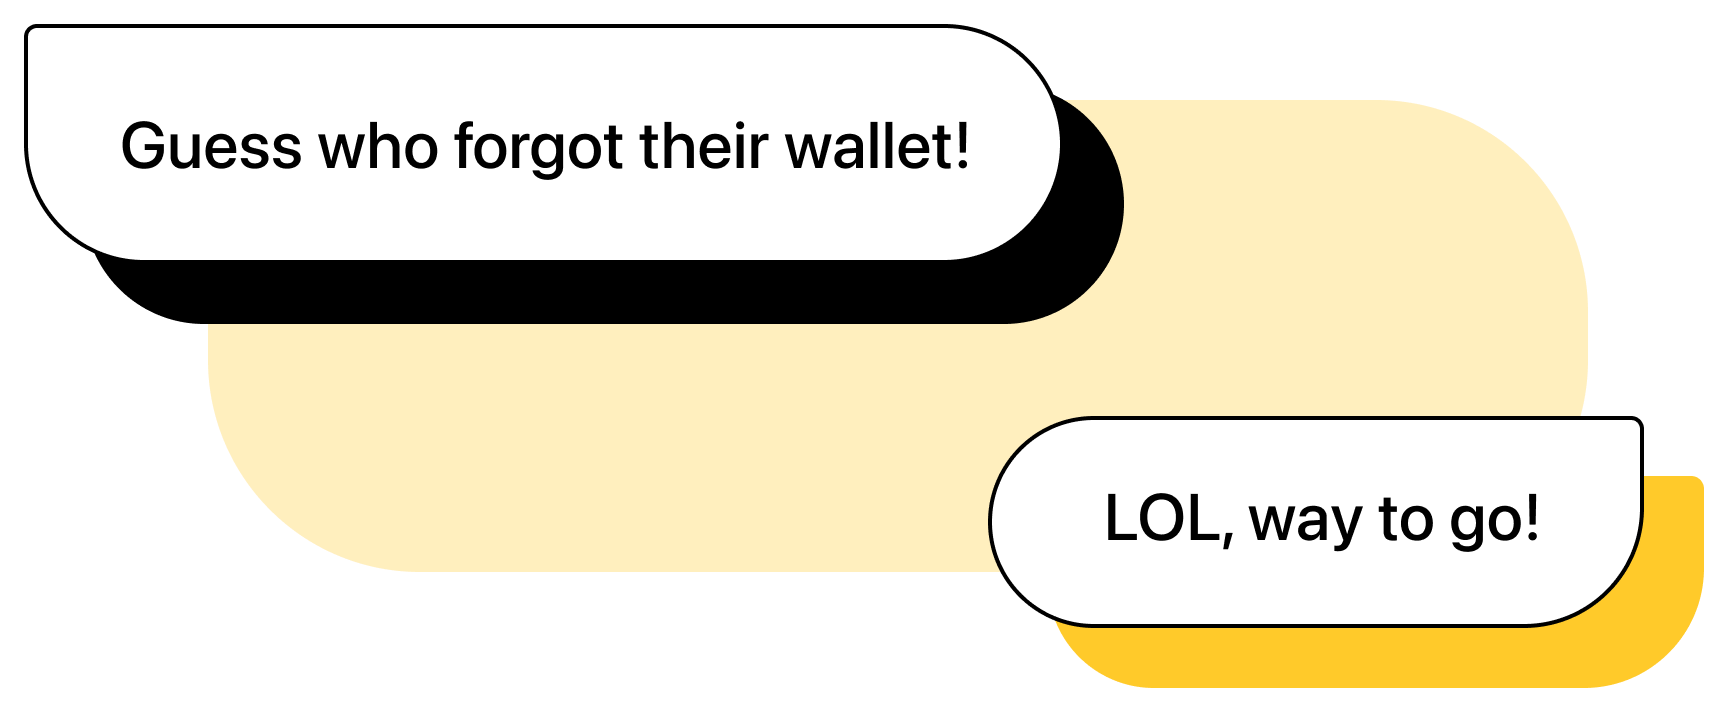 Two chat bubbles graphics. First message: "Guess who forgot their wallet!". Second message: "LOL, way to go!"